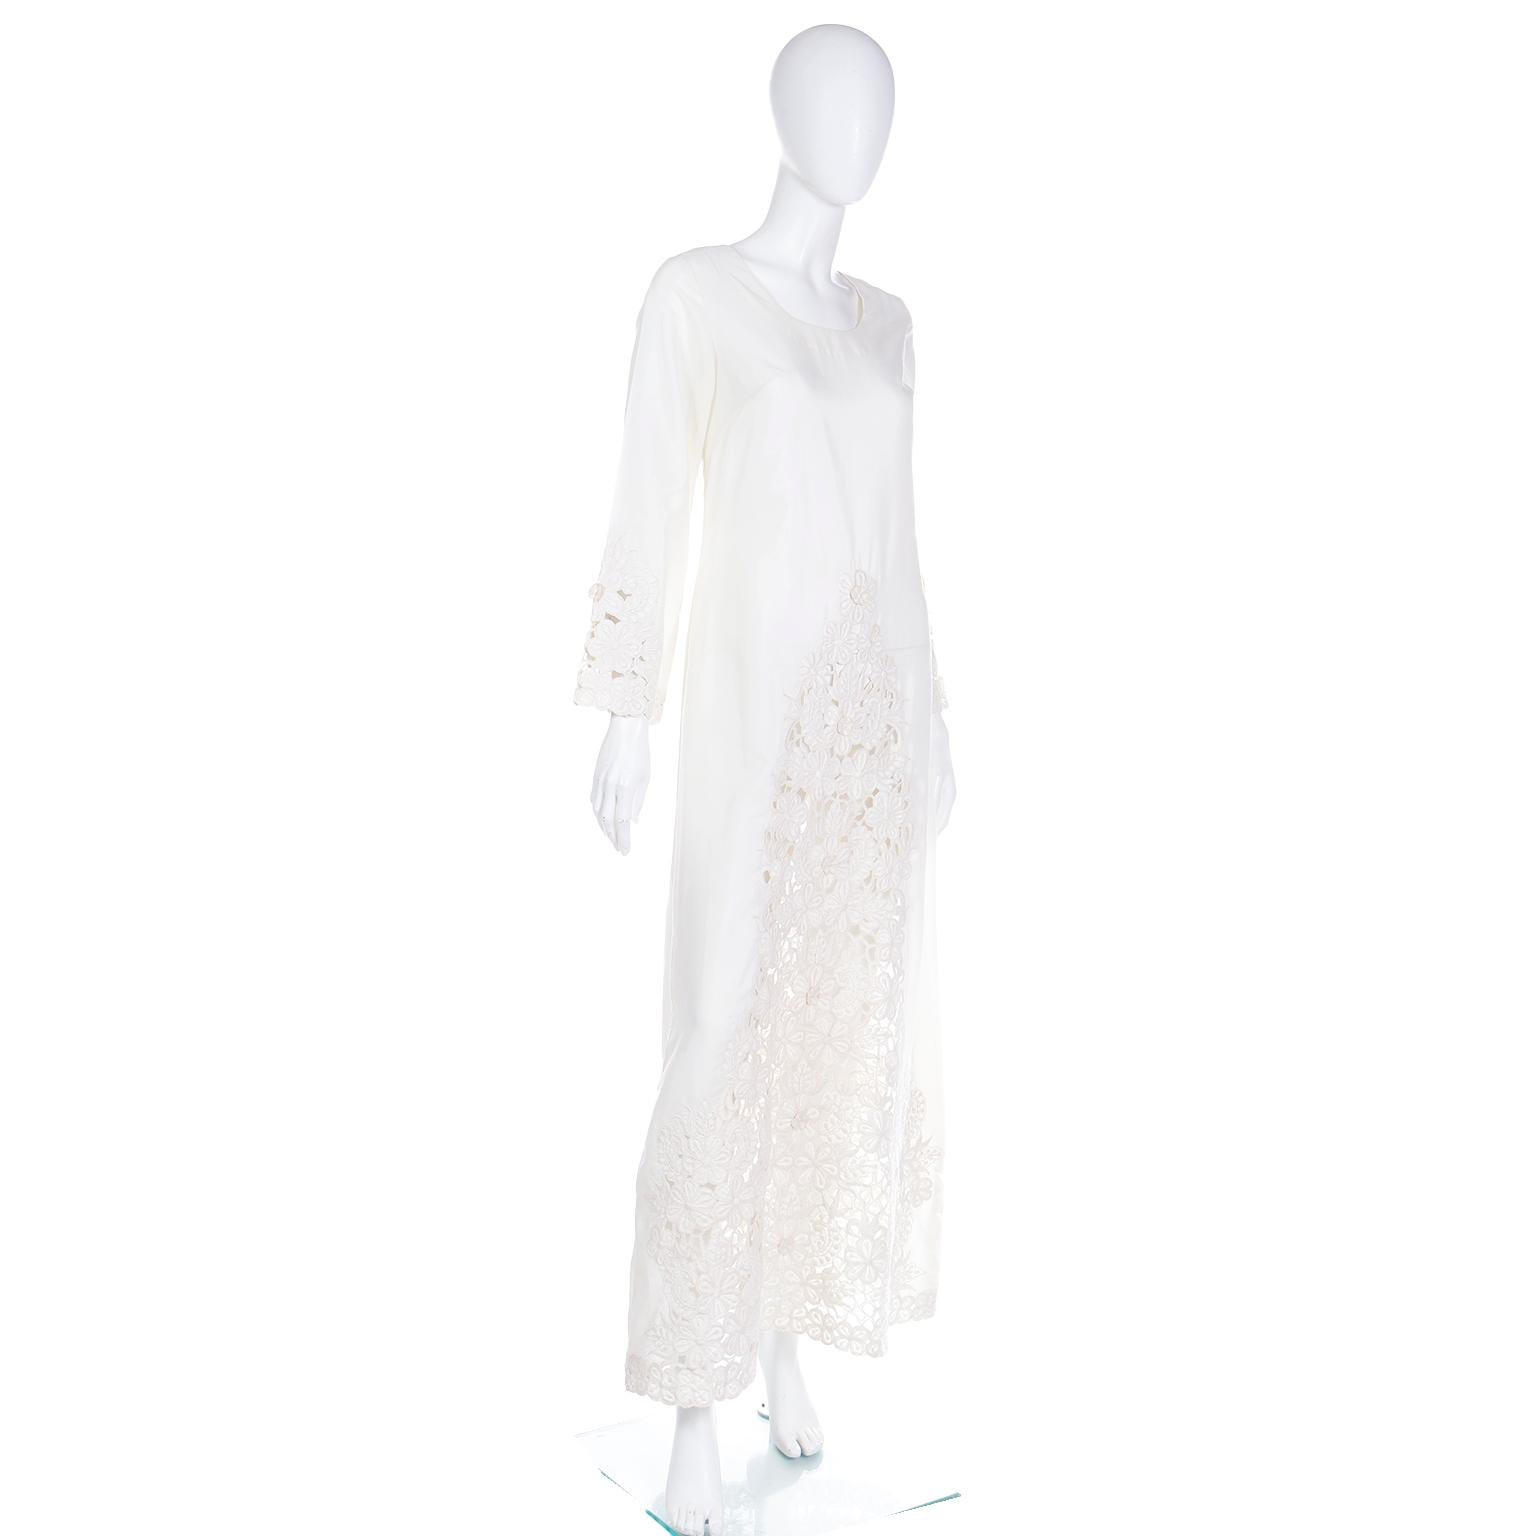 1970s Vintage Ivory Guipure Lace Maxi Dress Shangri La Hotel Singapore In Excellent Condition For Sale In Portland, OR